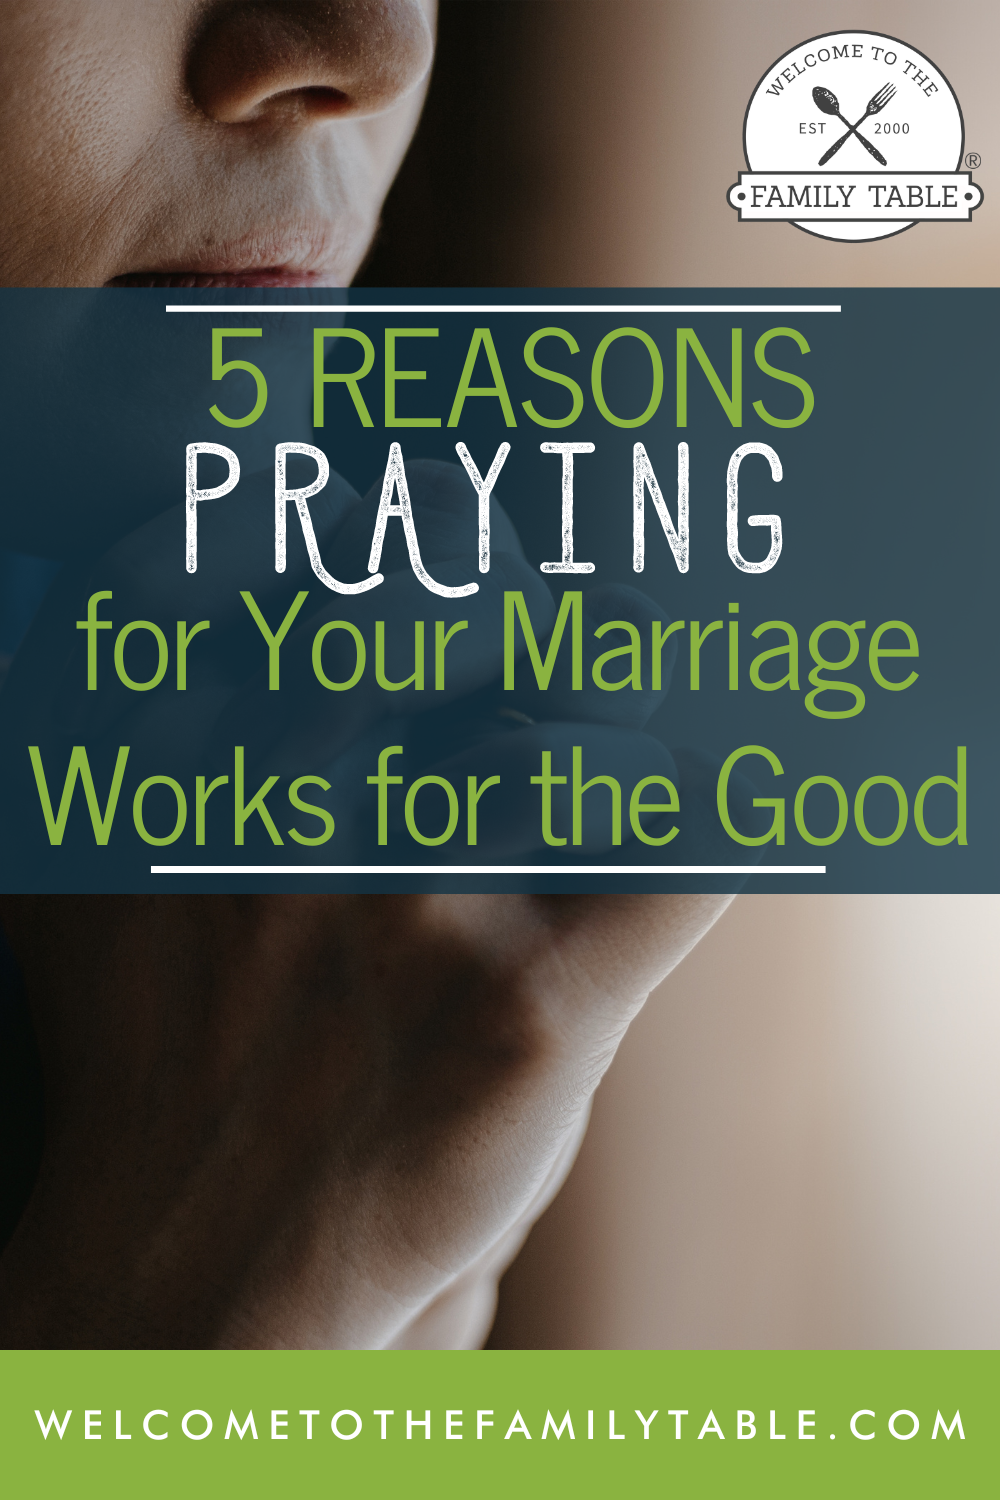 Why Praying for Your Marriage Works